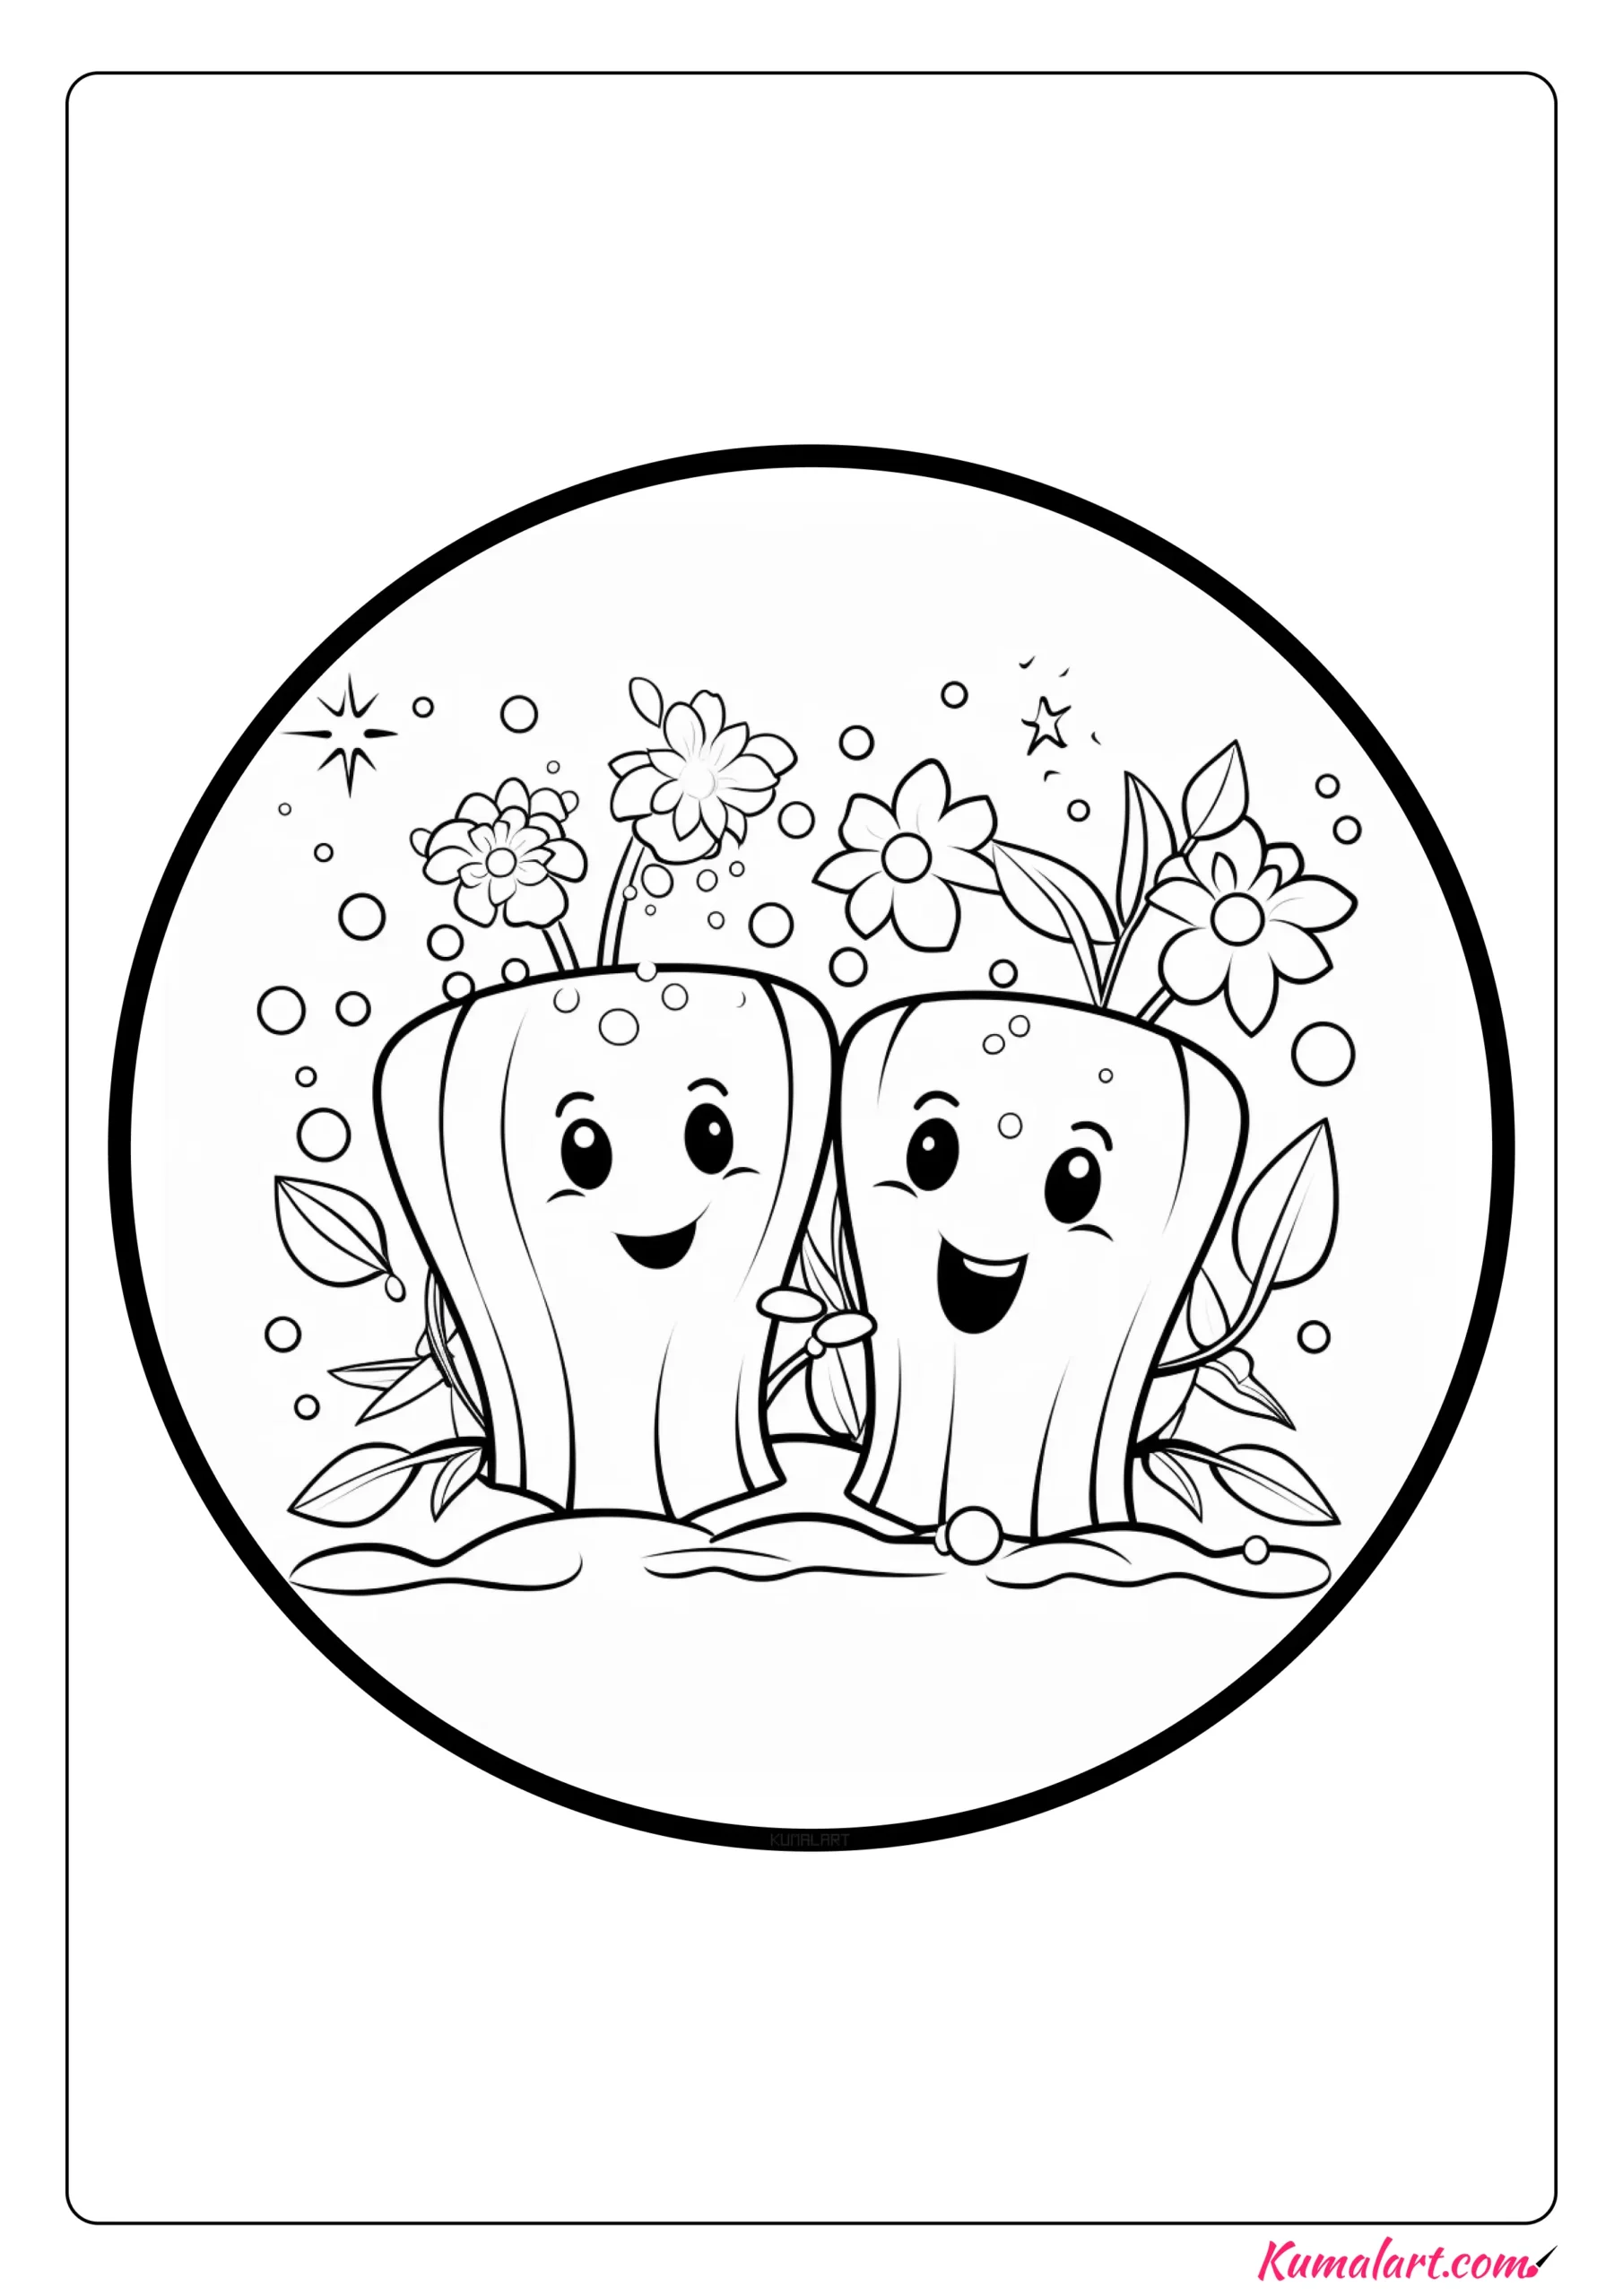 Magical Tooth Brushing Coloring Page